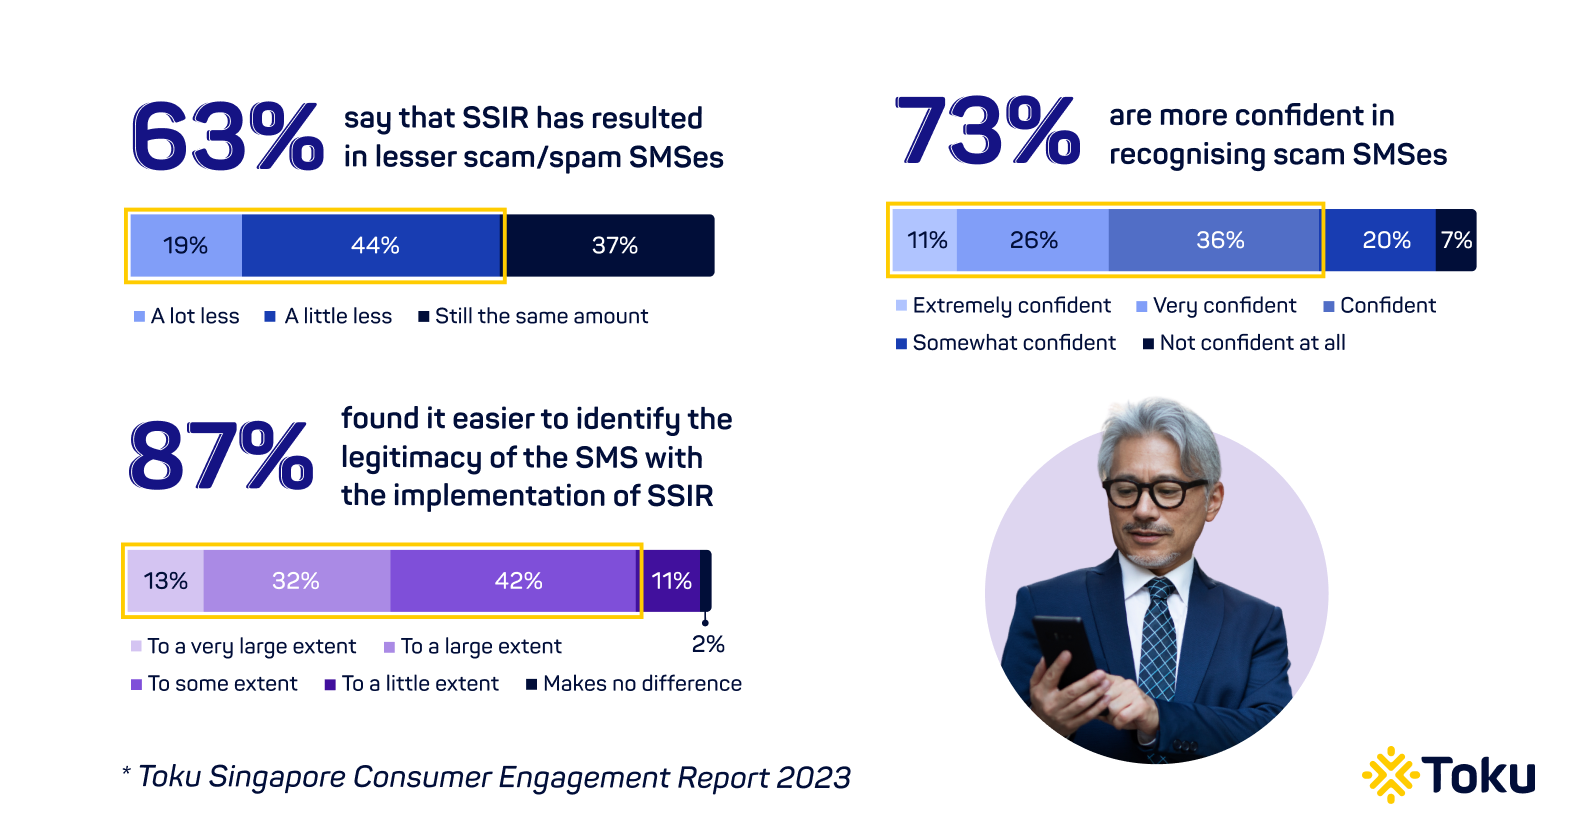 2023 consumer impressions of SSIR